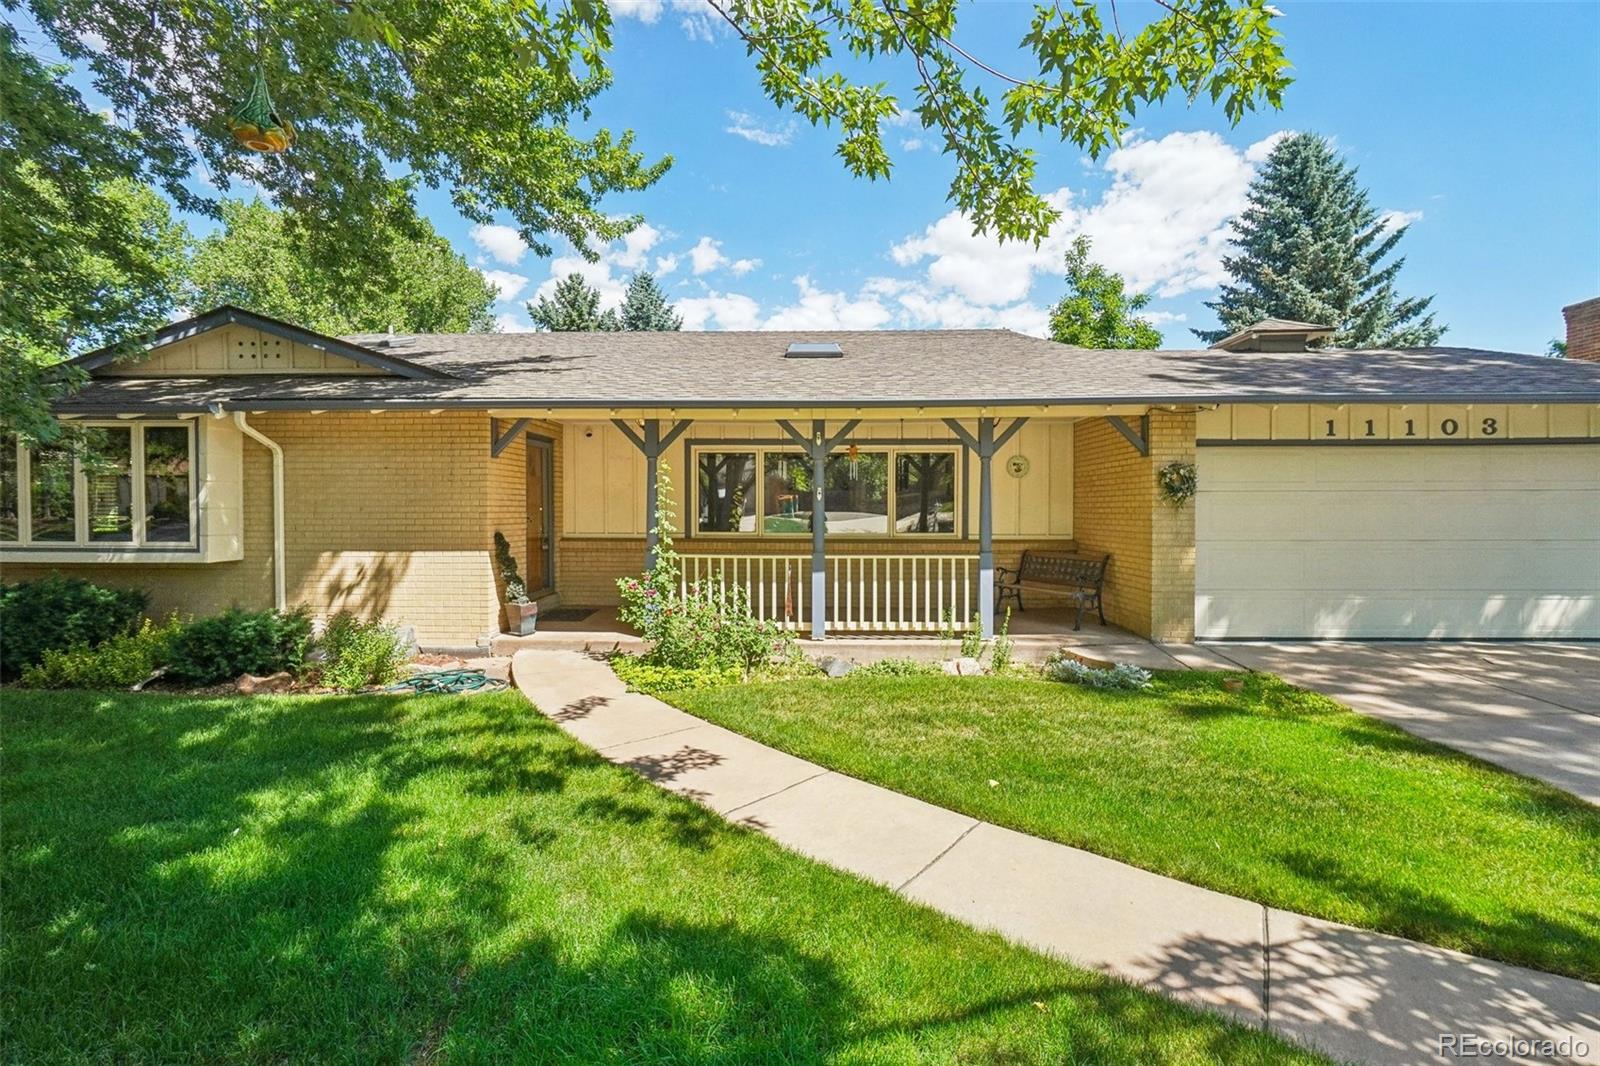 Report Image for 11103 W 27th Avenue,Lakewood, Colorado